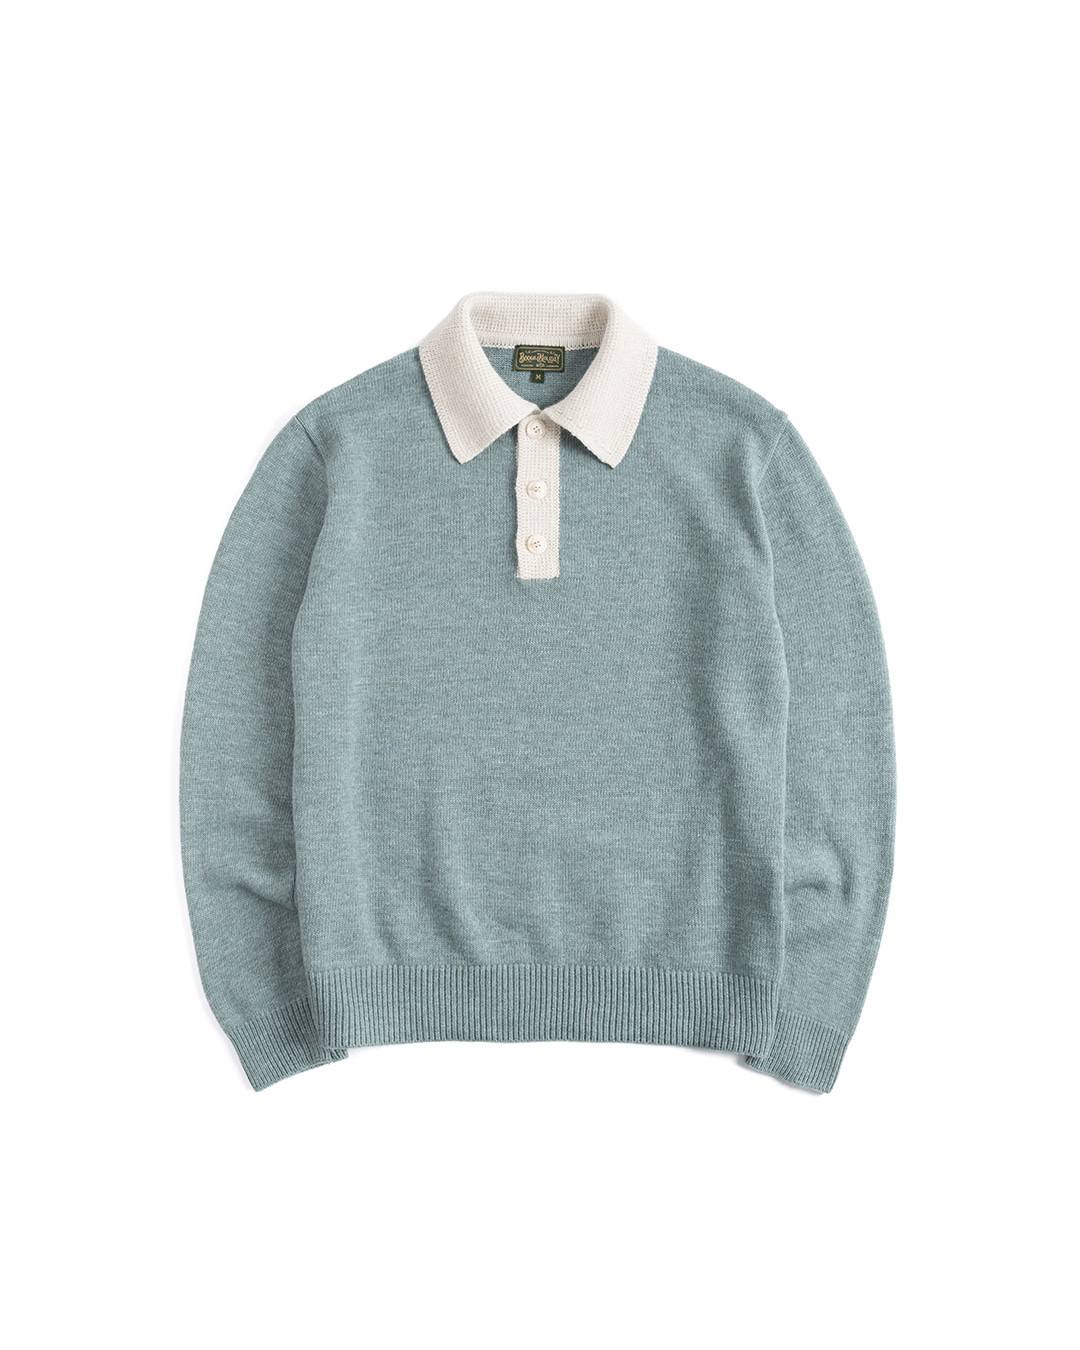 10 KNITTED RUGBY SHIRT (sky blue)